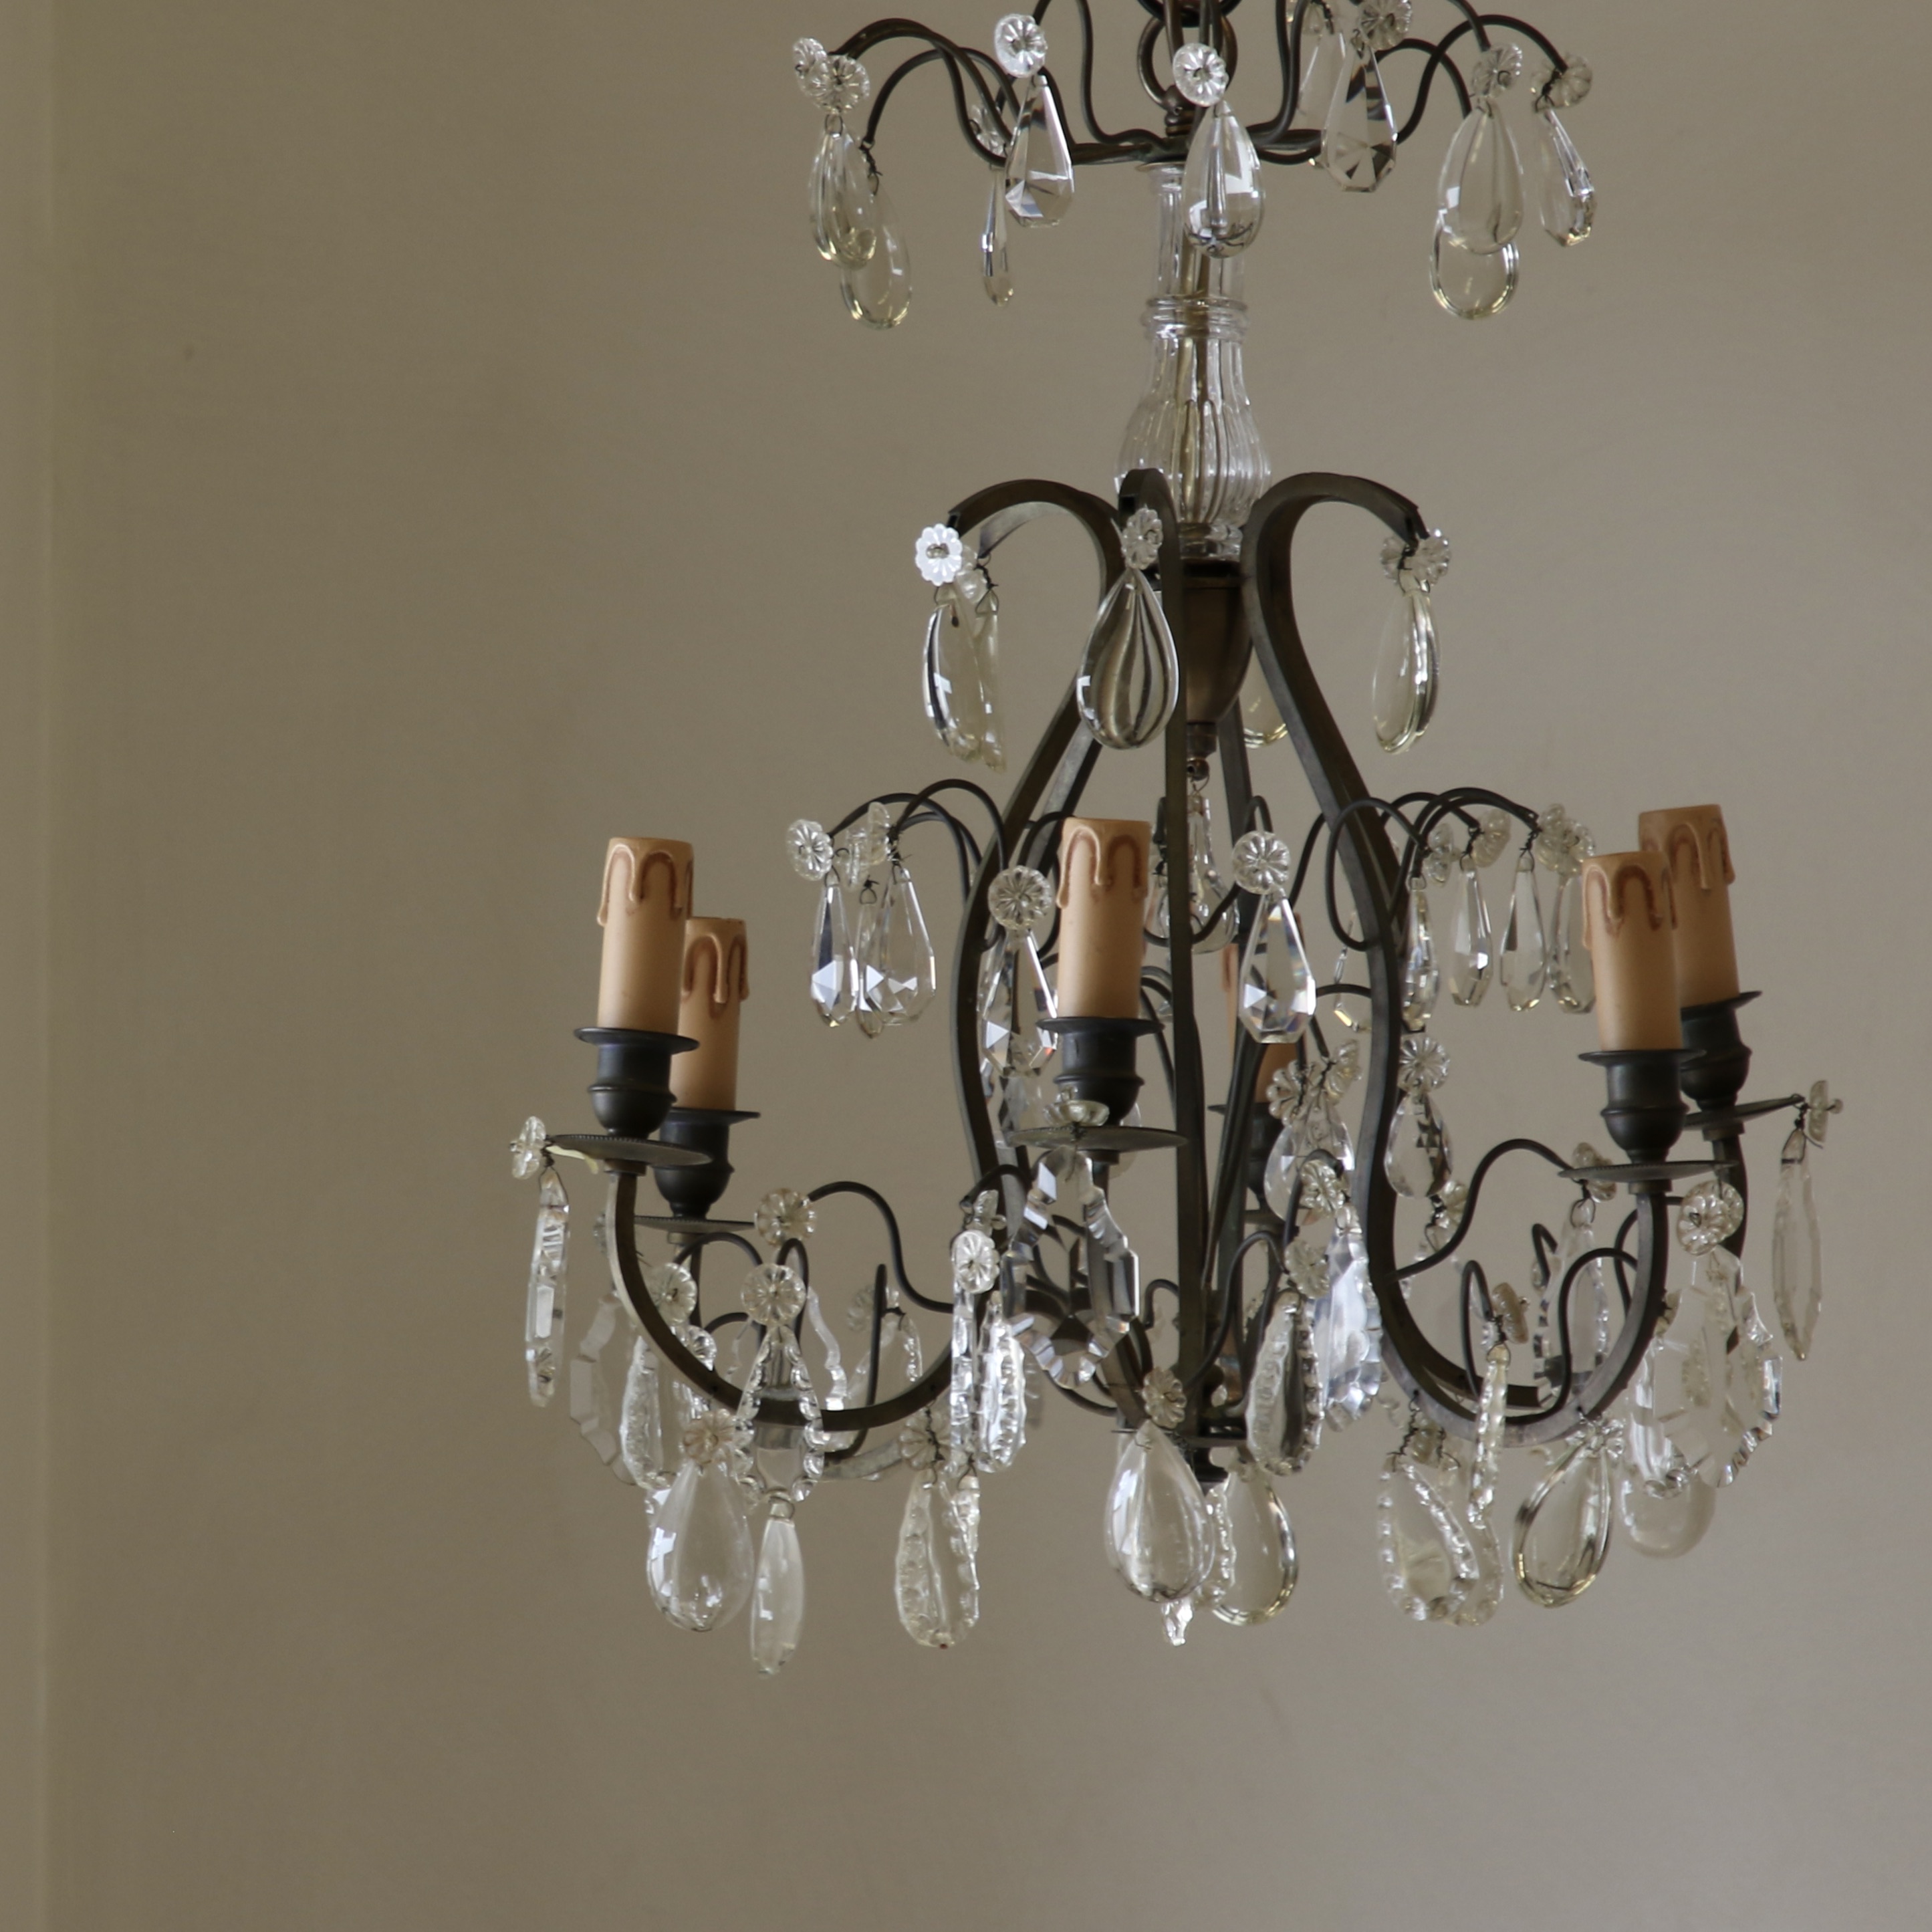 Light Beautiful French Chandelier